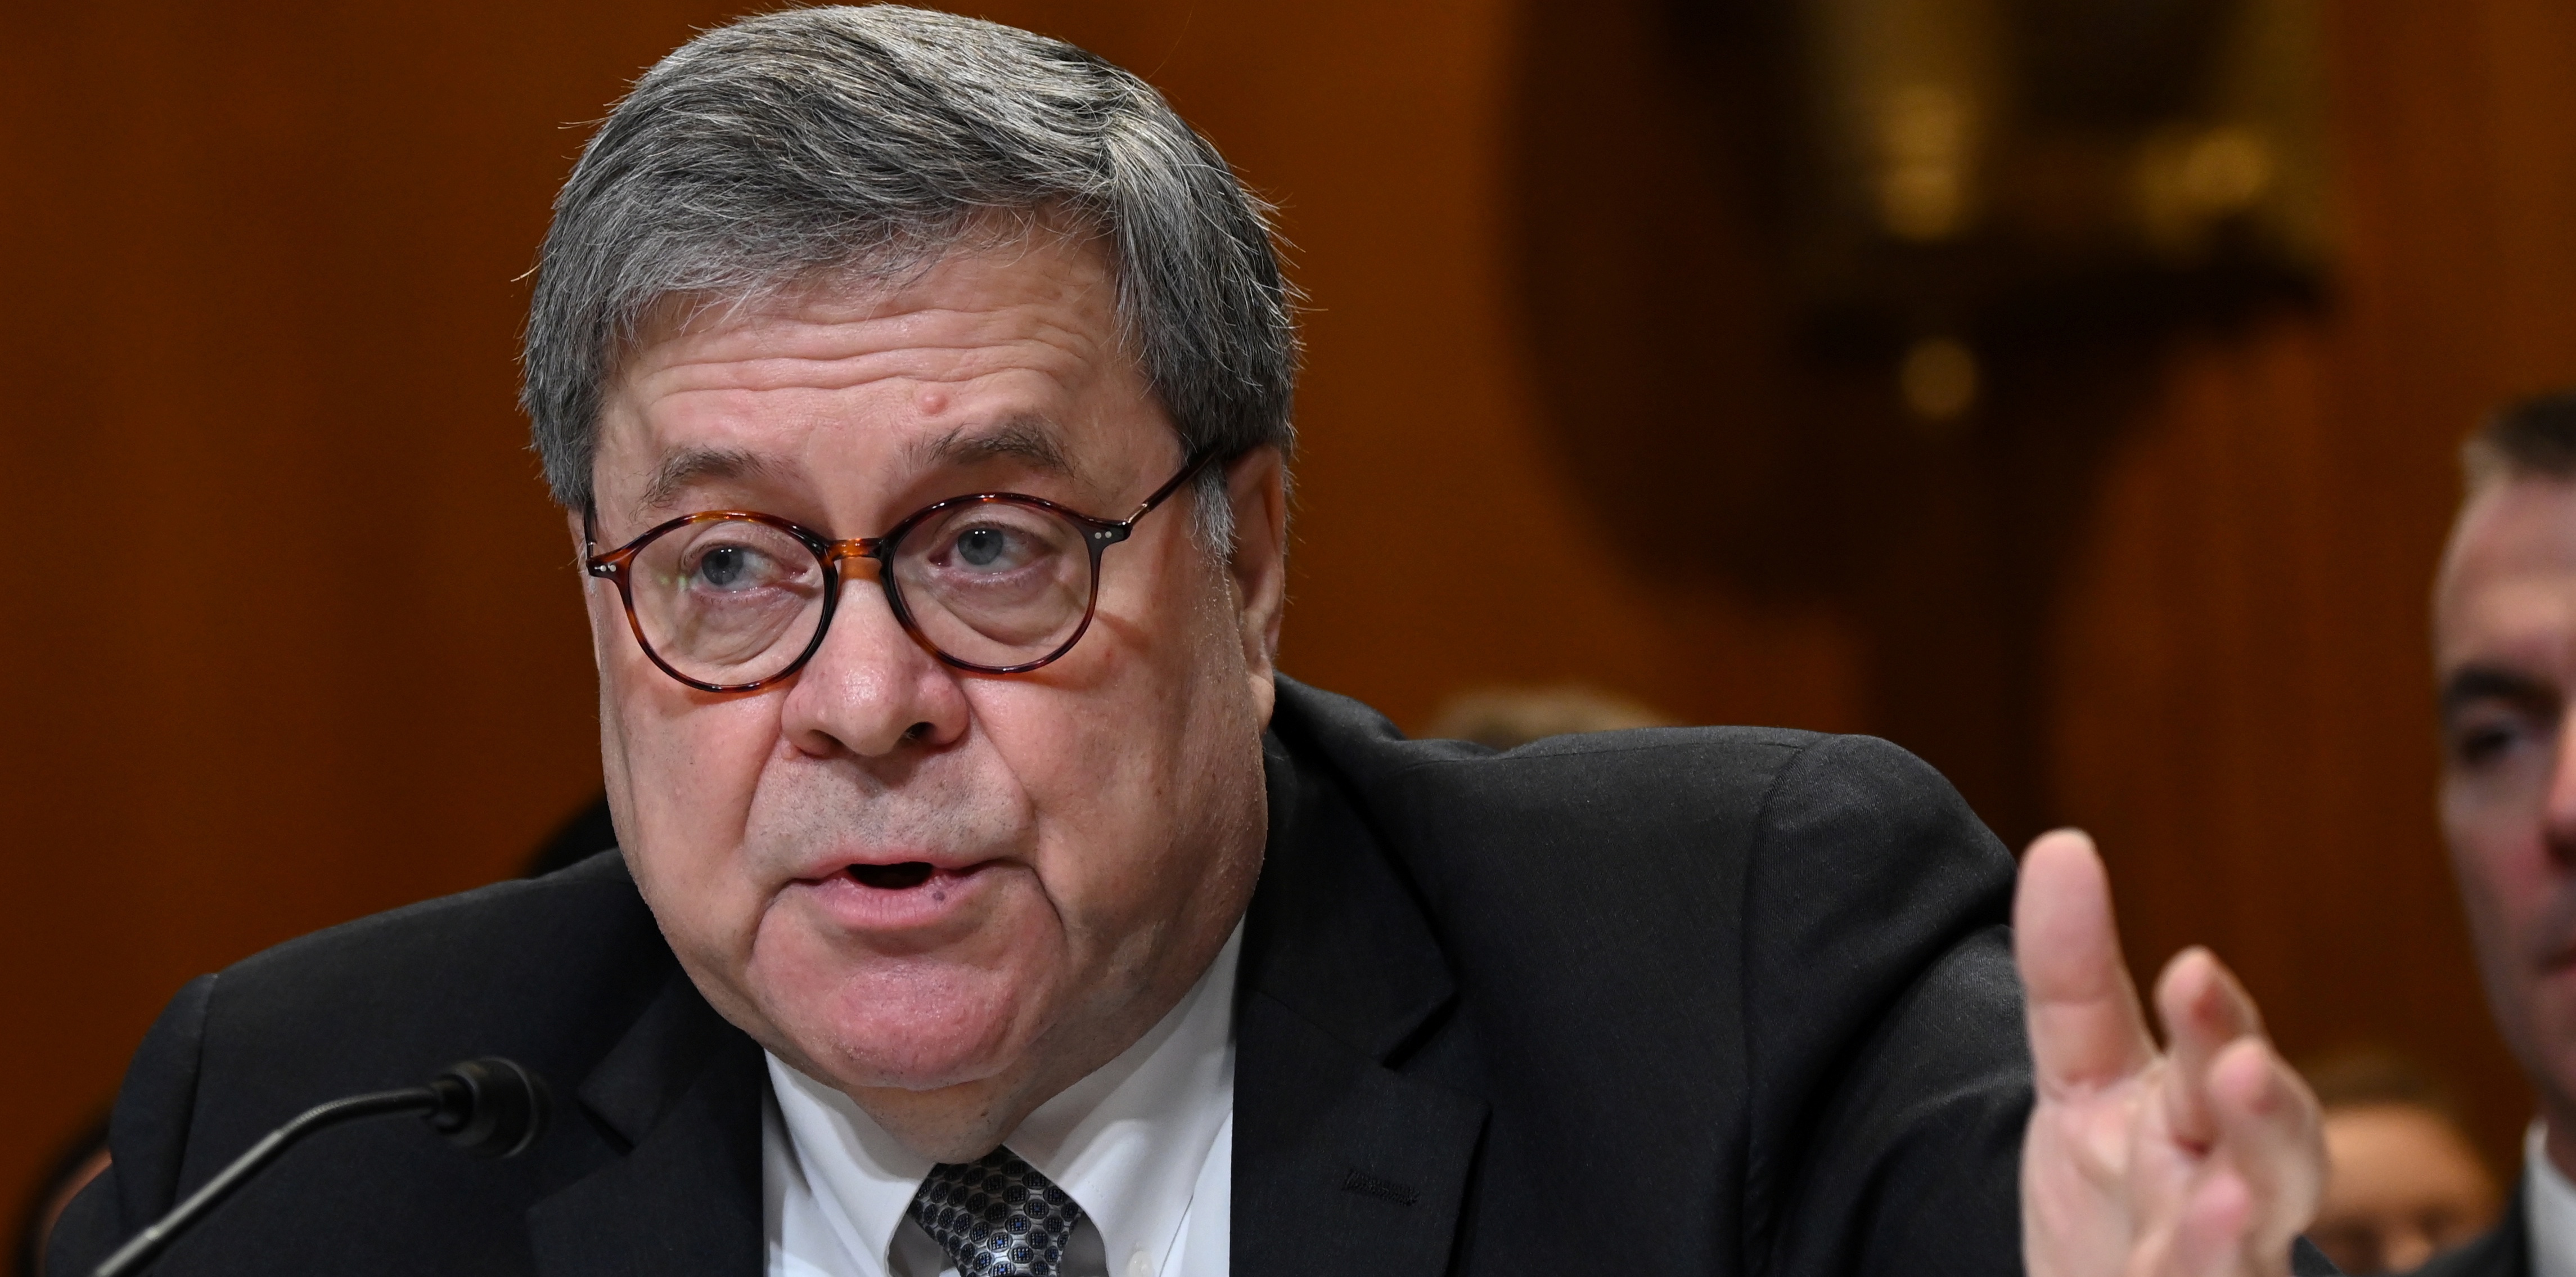 U.S. Attorney General William Barr testifies before a Senate Appropriations Subcommittee hearing on the proposed budget estimates for the Department of Justice in Washington, U.S., April 10, 2019. REUTERS/Erin Scott